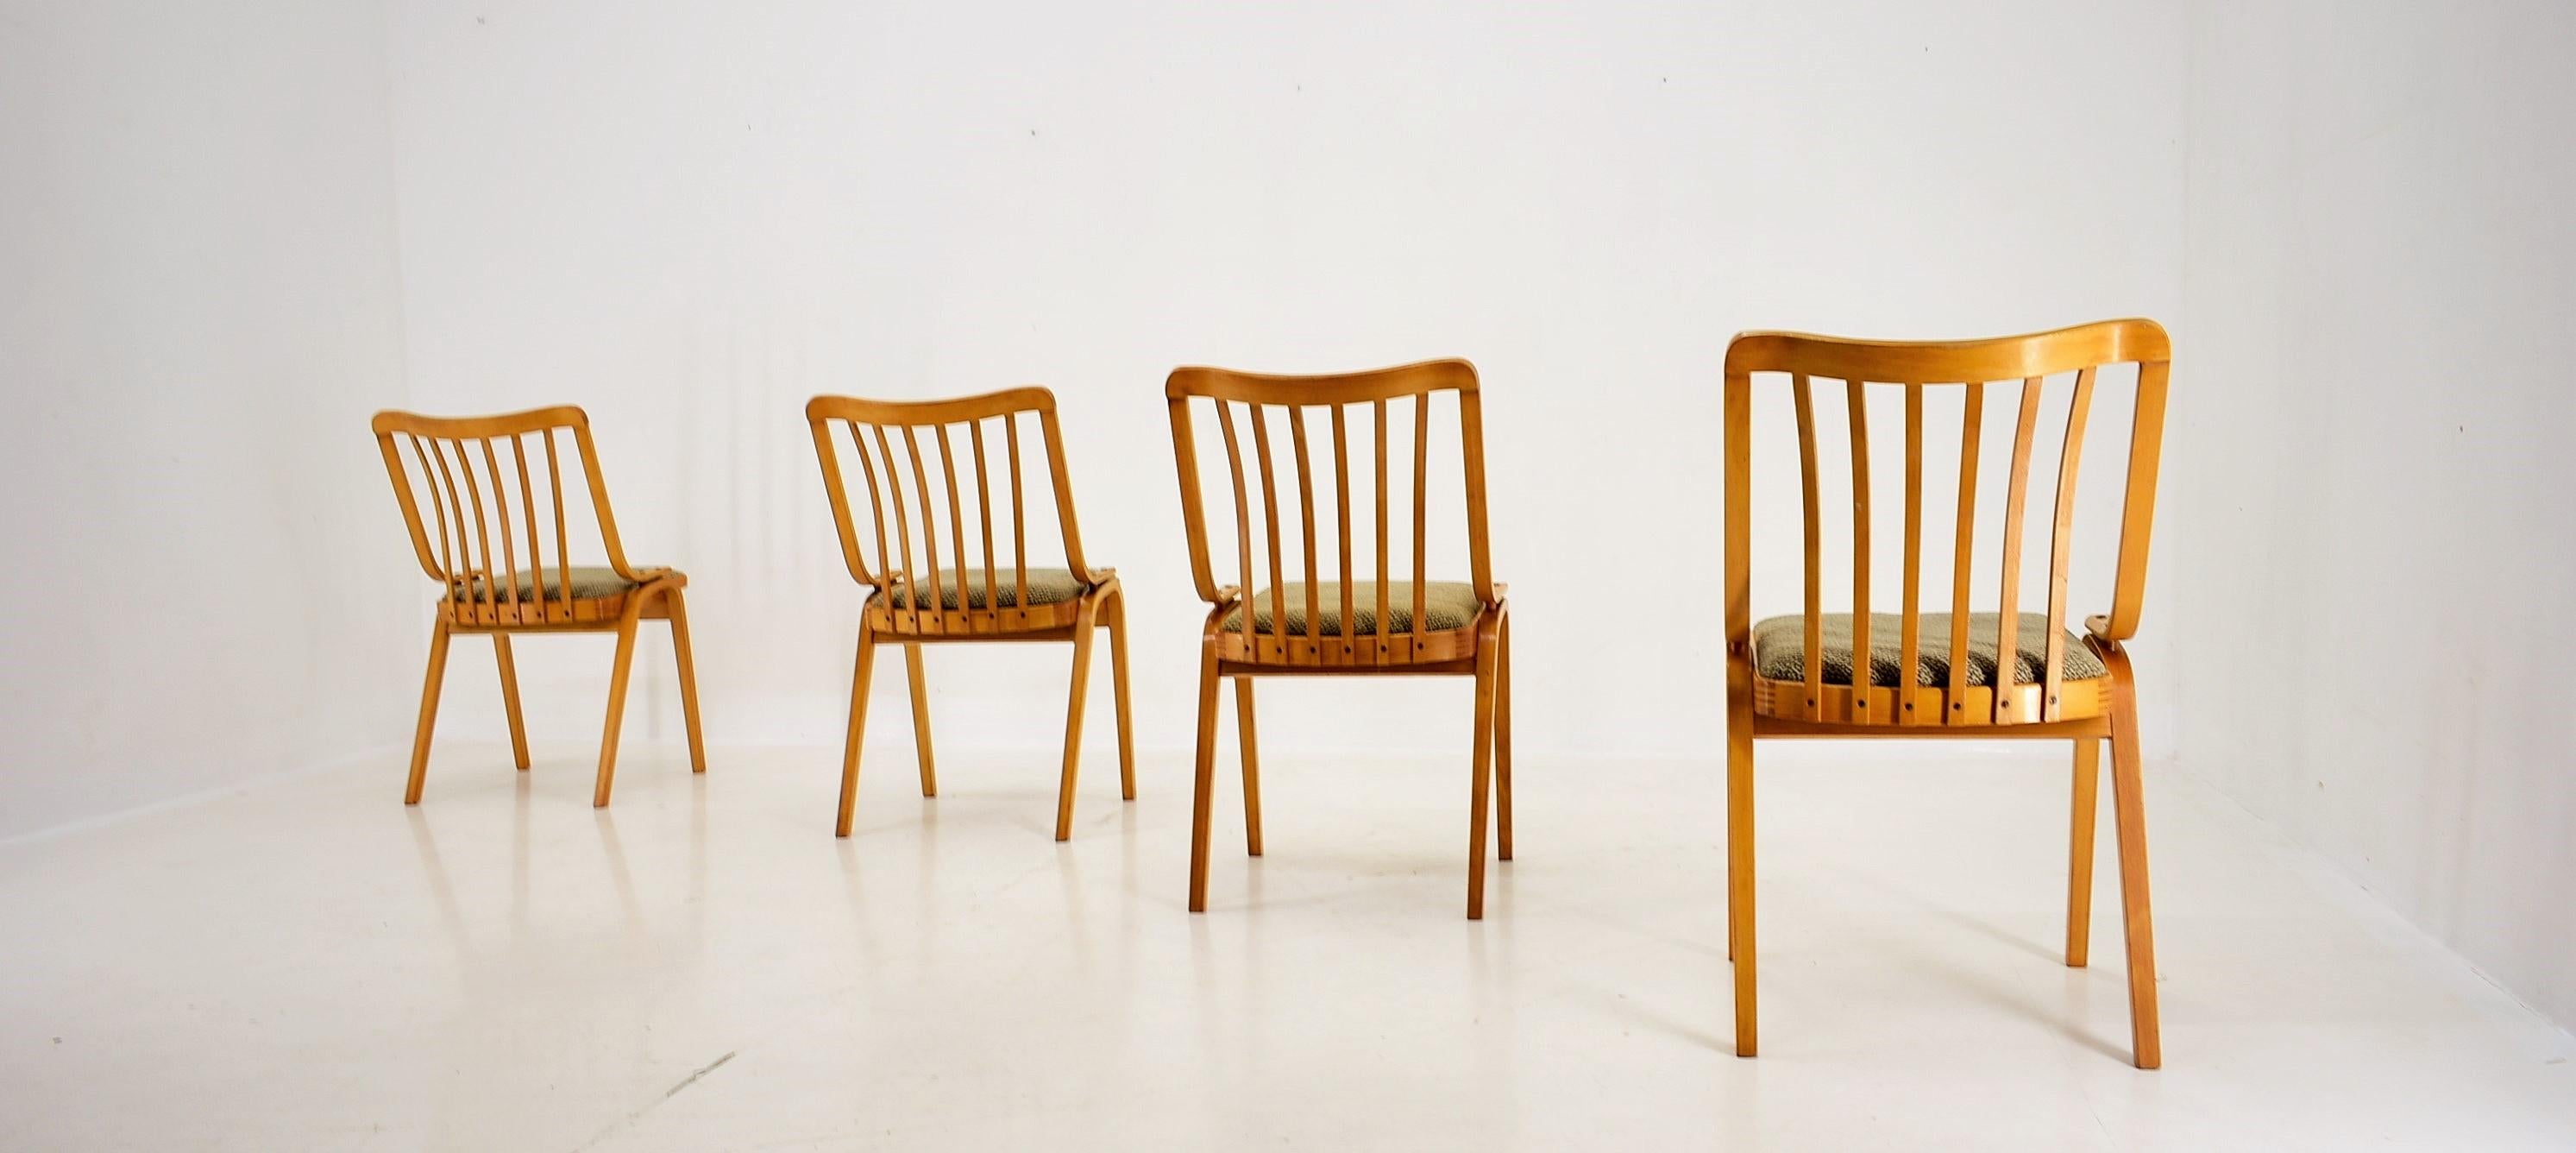 Set of 4 Dining Chairs Designed by Antonín Šuman, 1960s For Sale 4